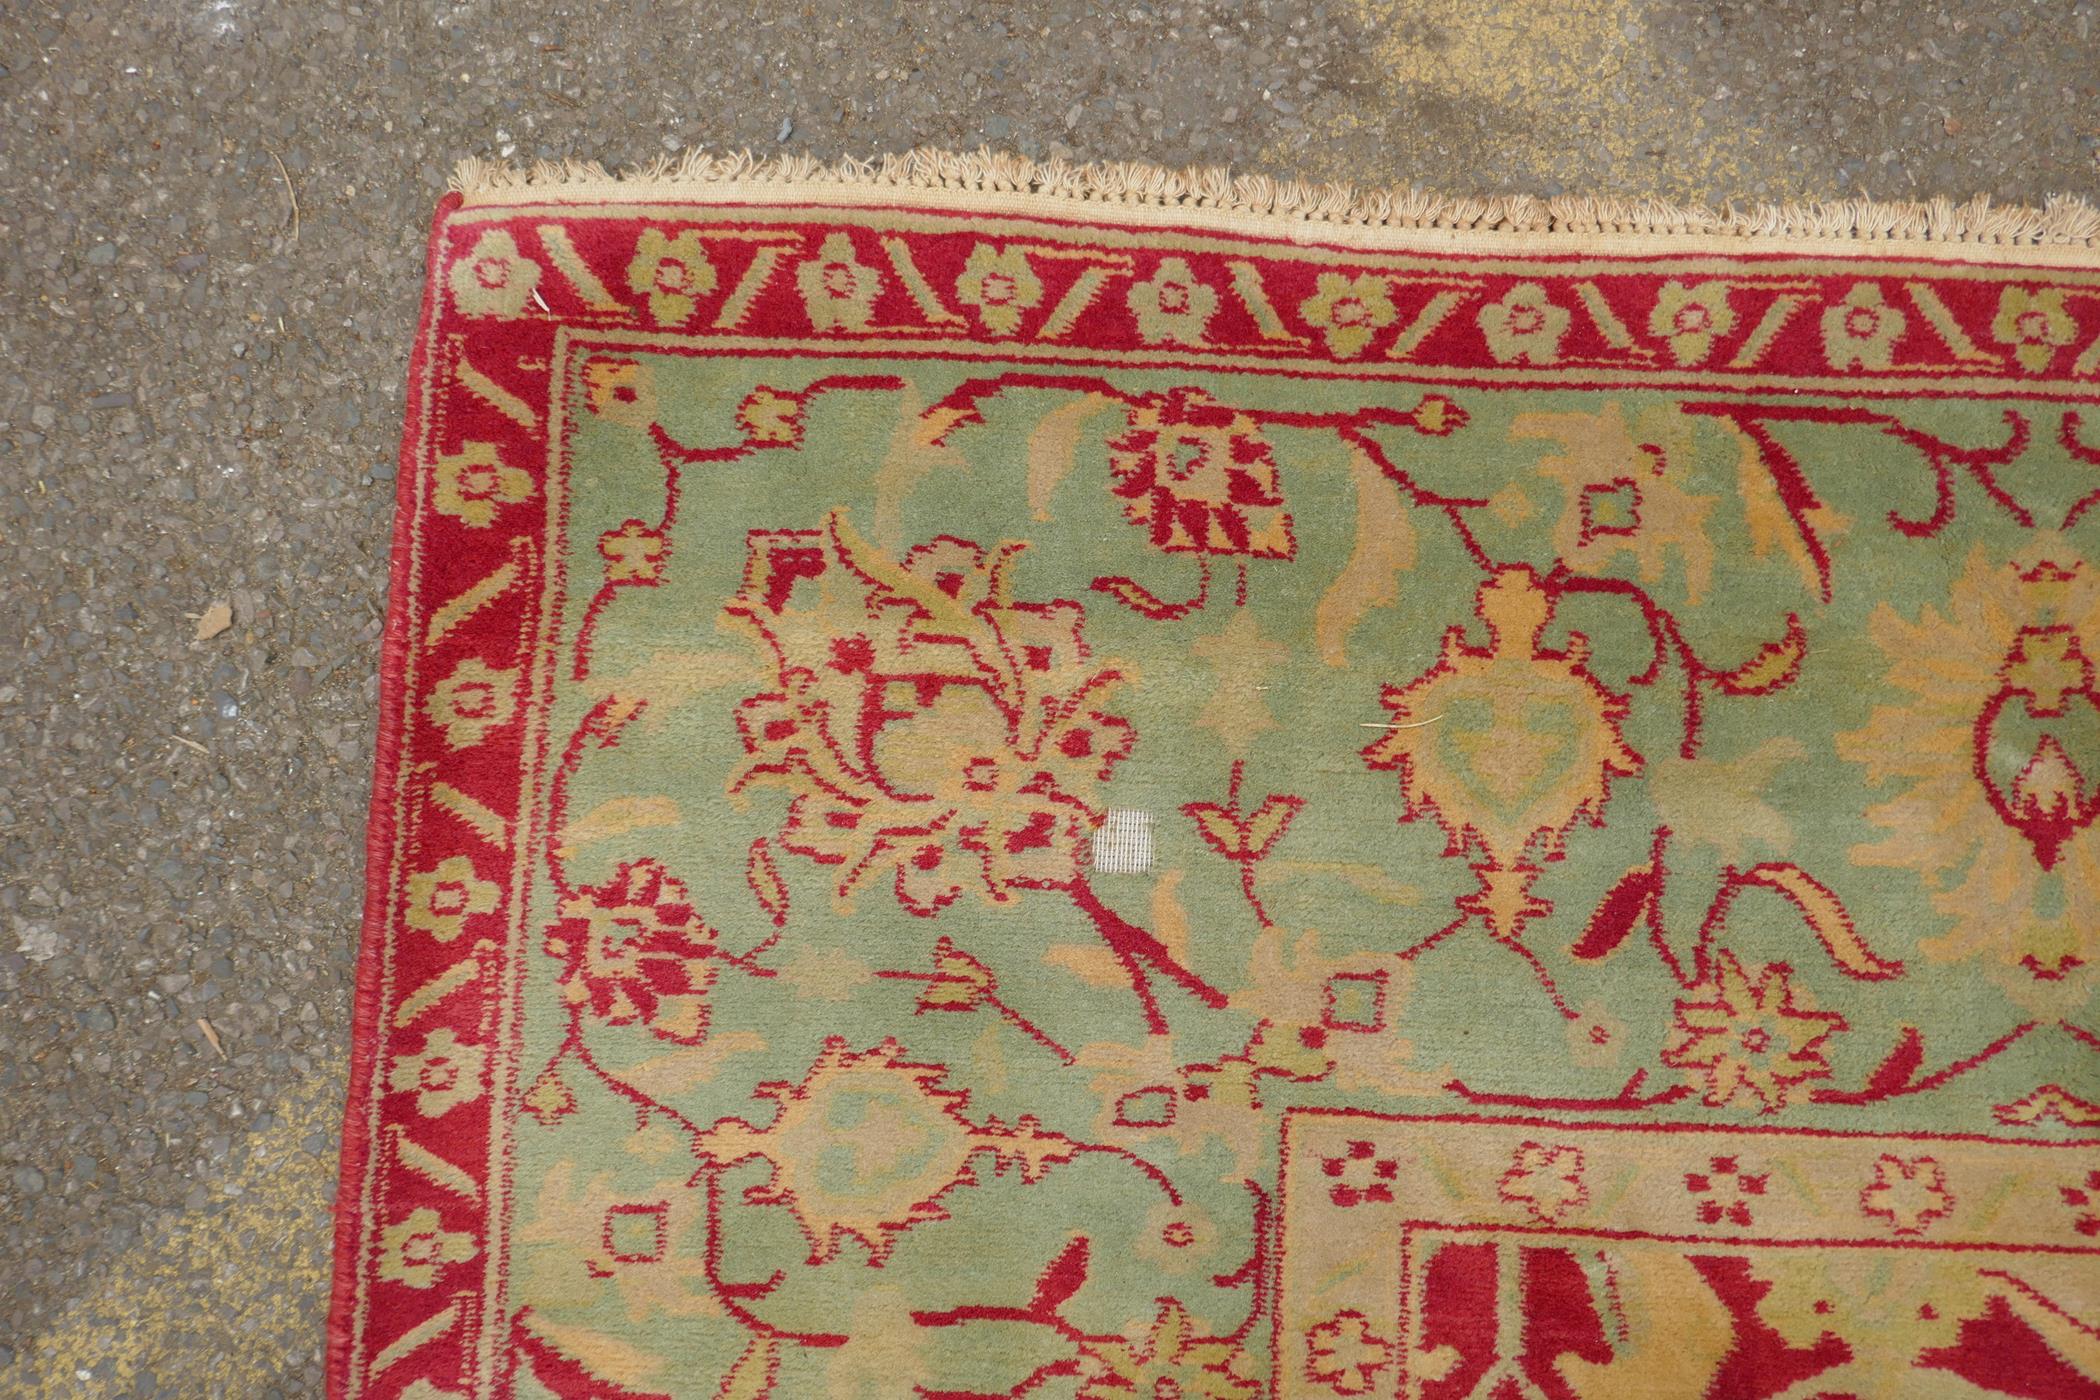 An antique red ground Agra carpet with floral design and olive green borders, AF wear, 108" x 140" - Image 5 of 8